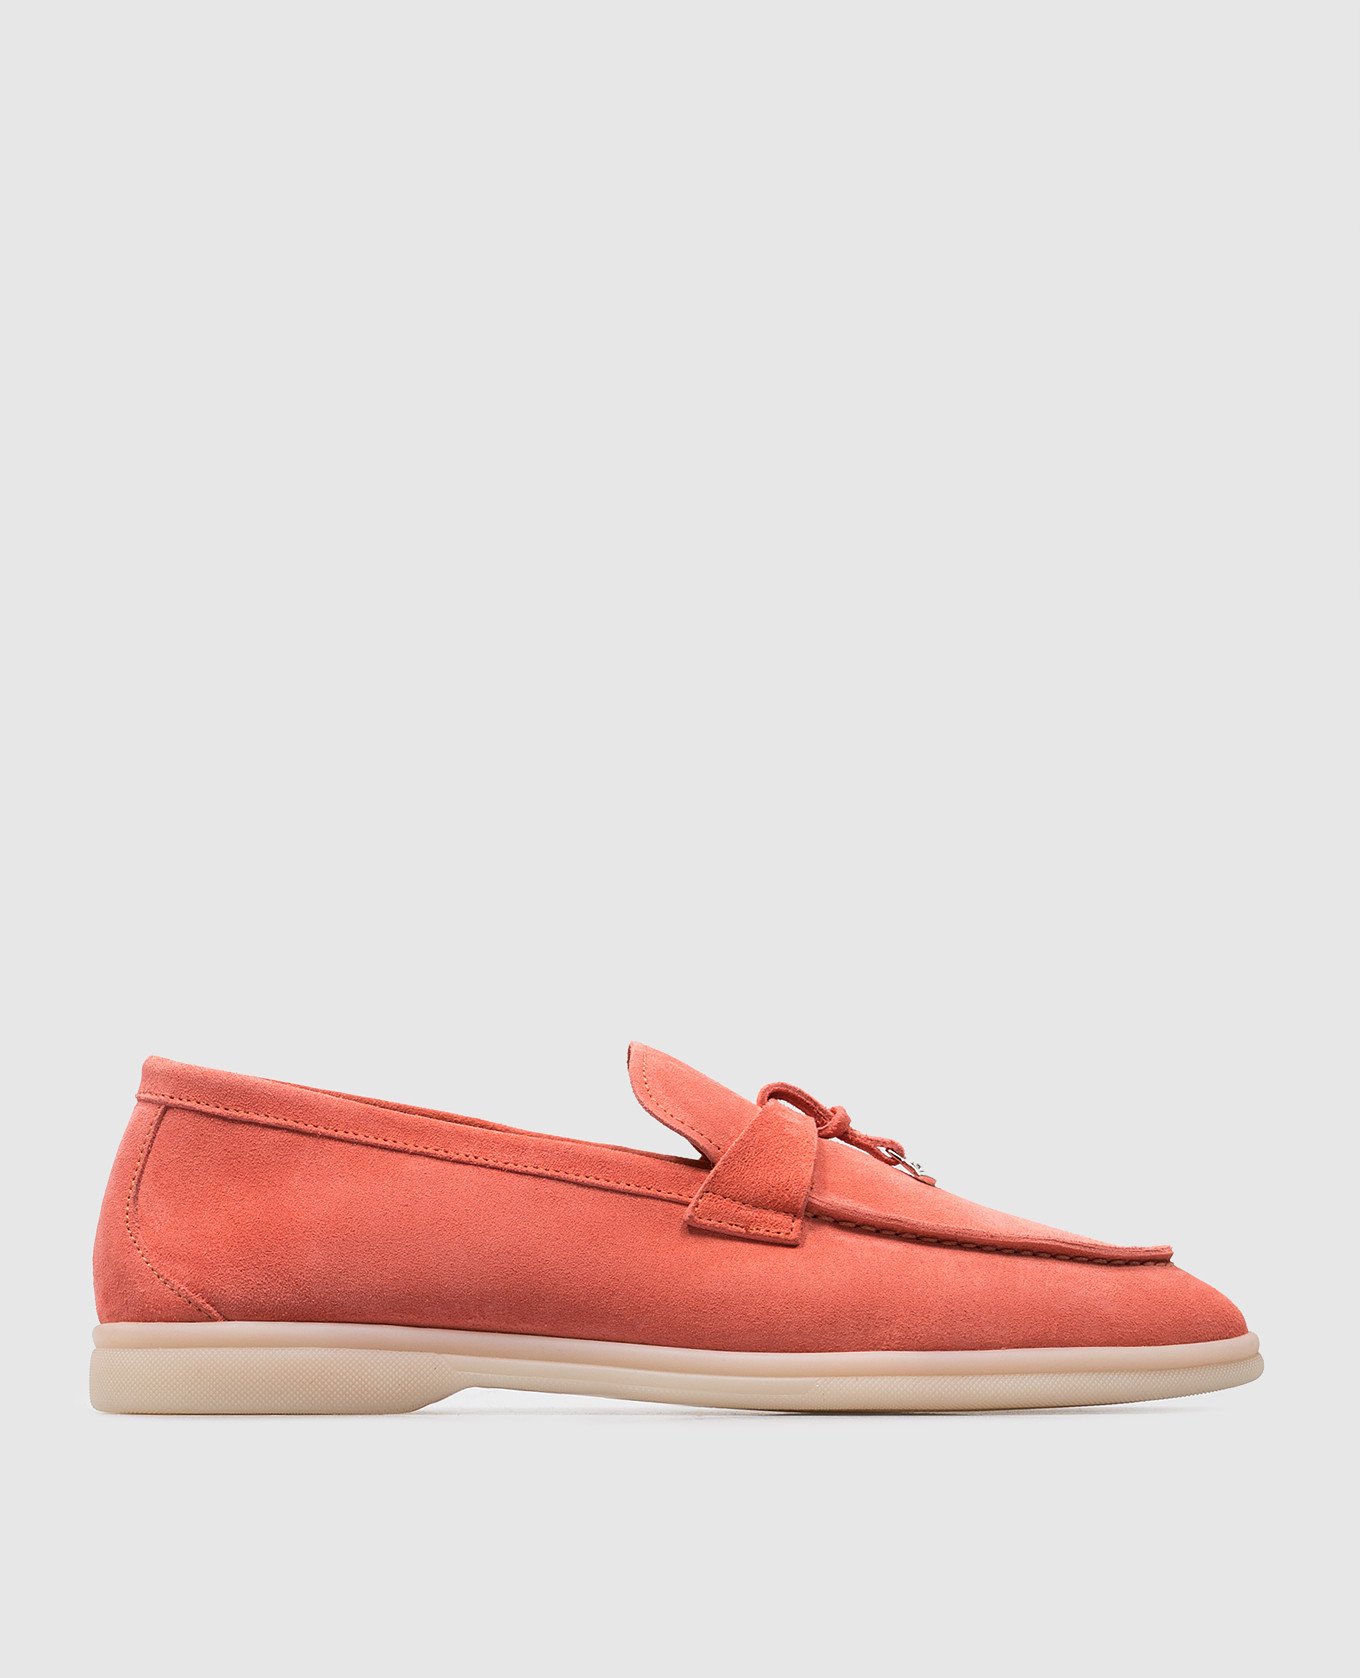 Pink suede loafers with metallic logo